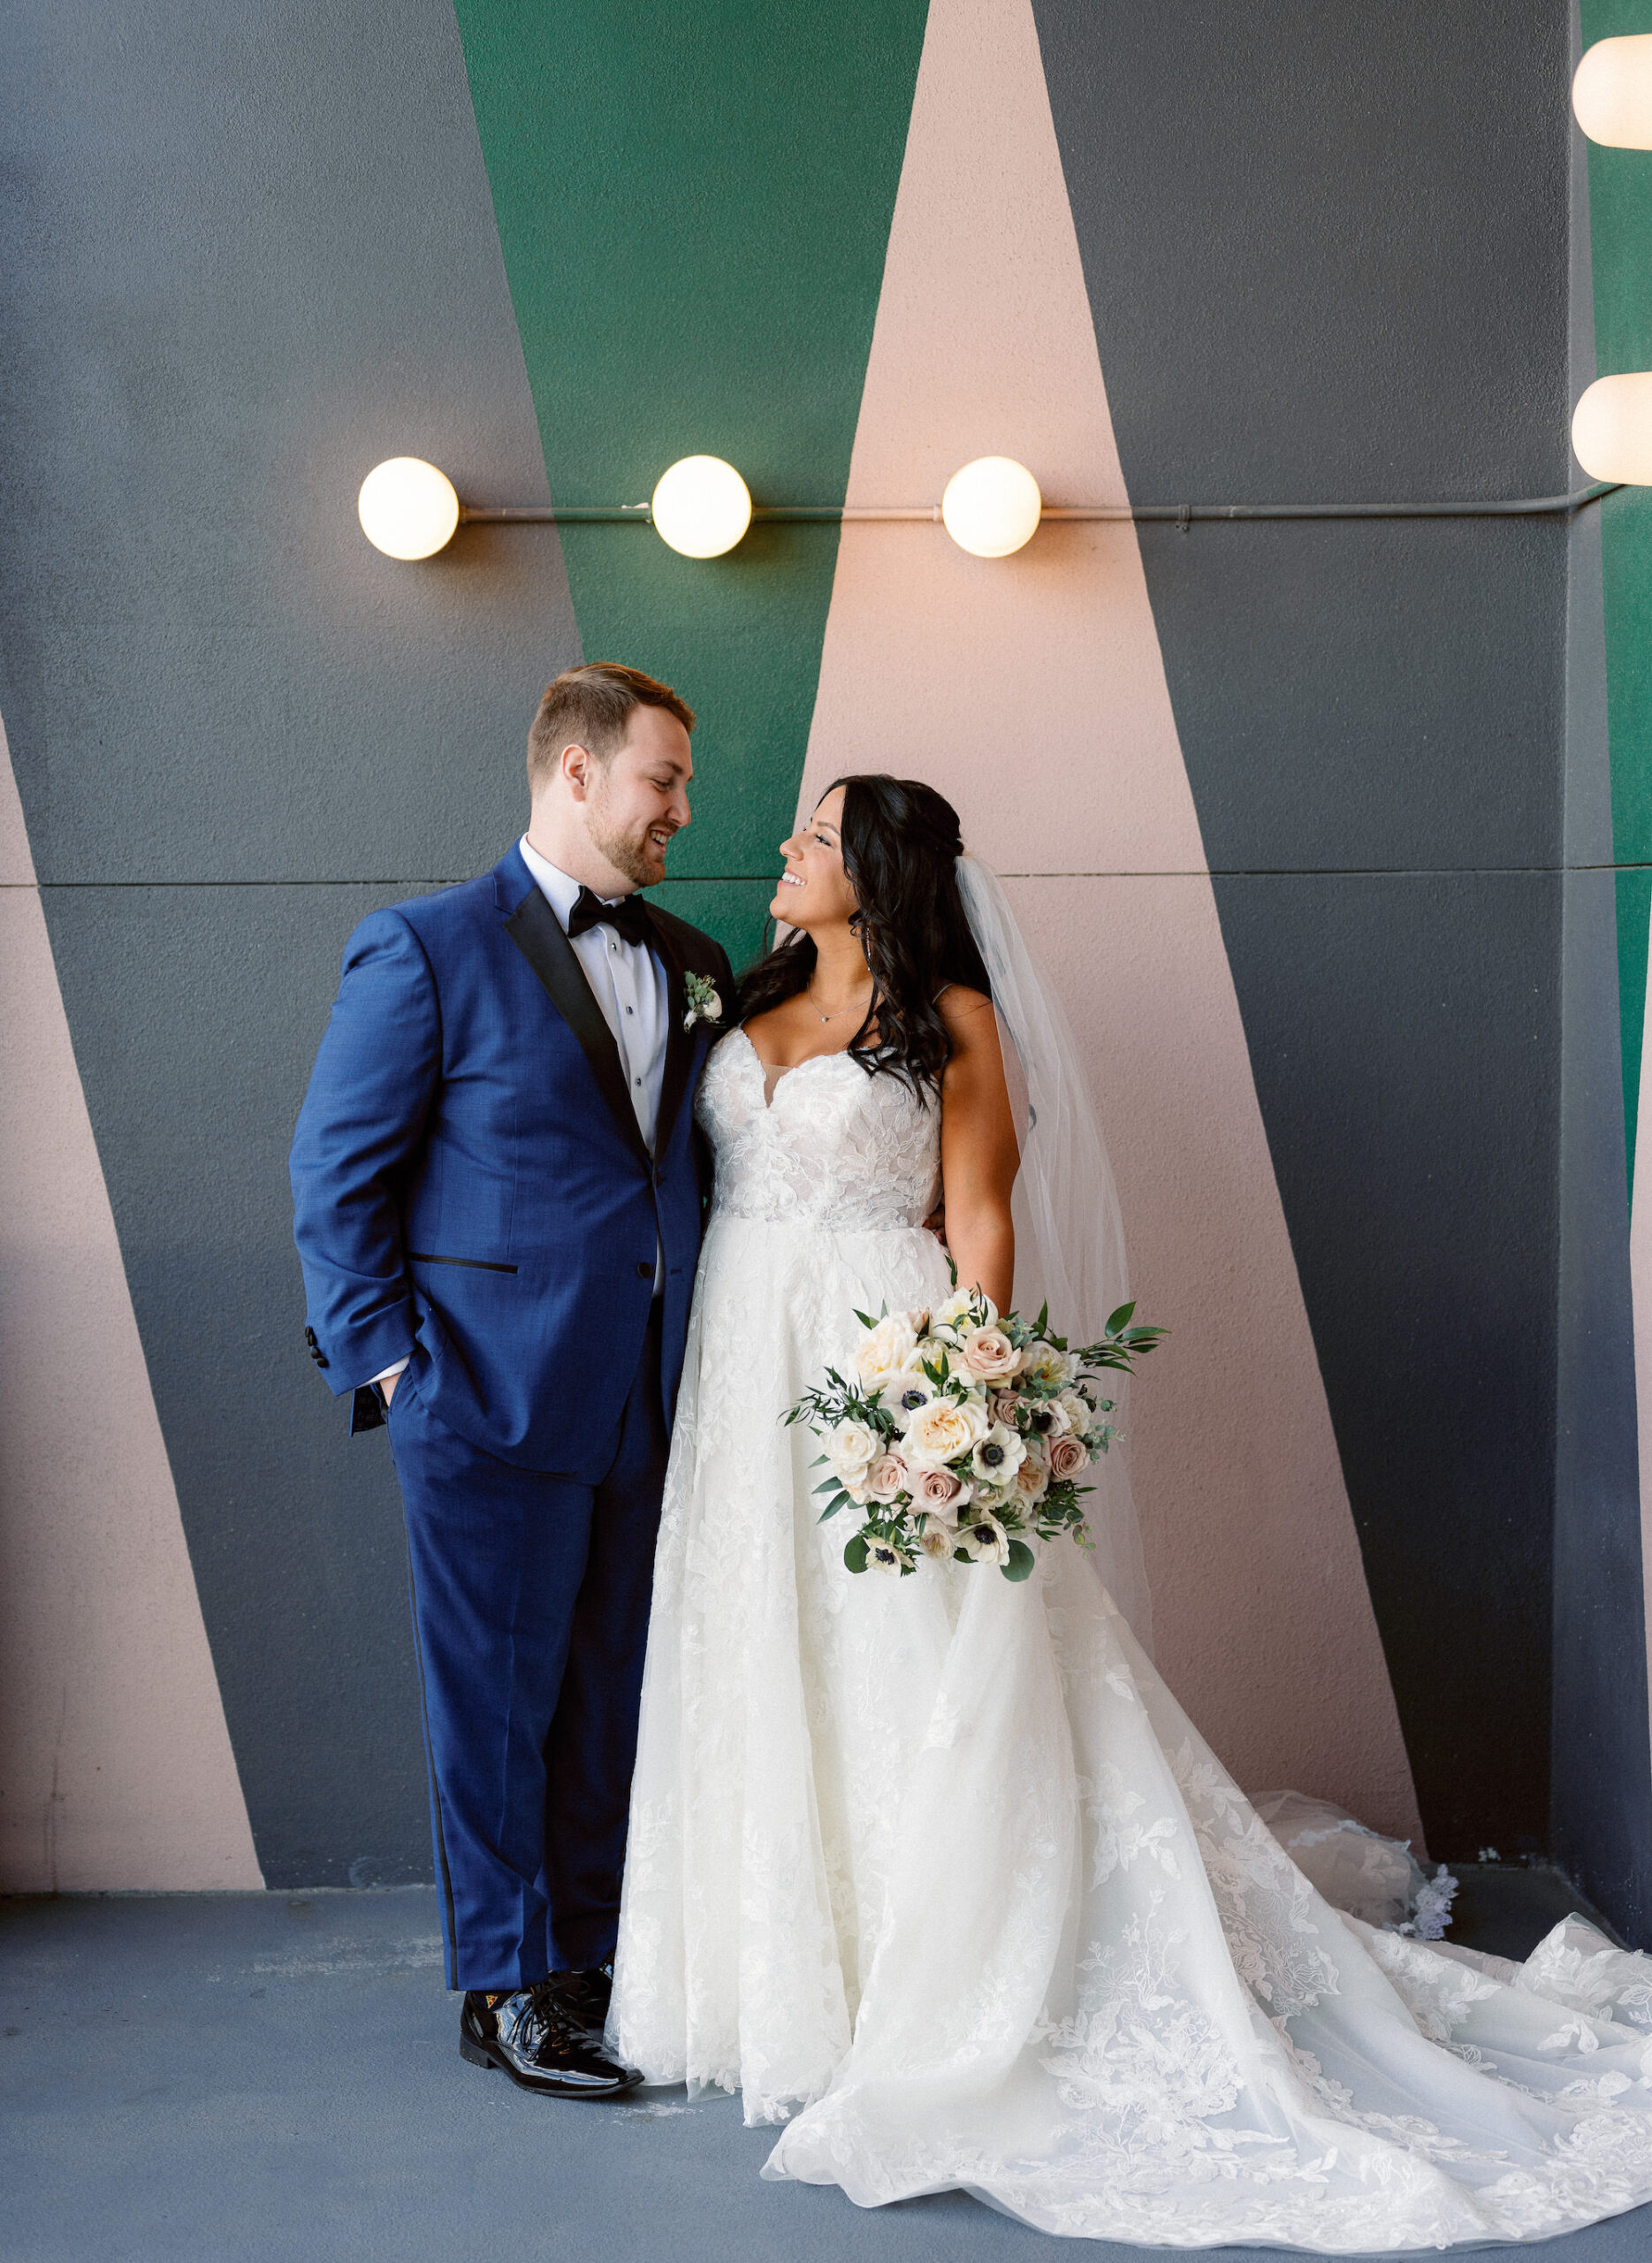 Bride and Groom Modern Wedding Portrait | Tampa Bay Photographer Dewitt for Love Photography